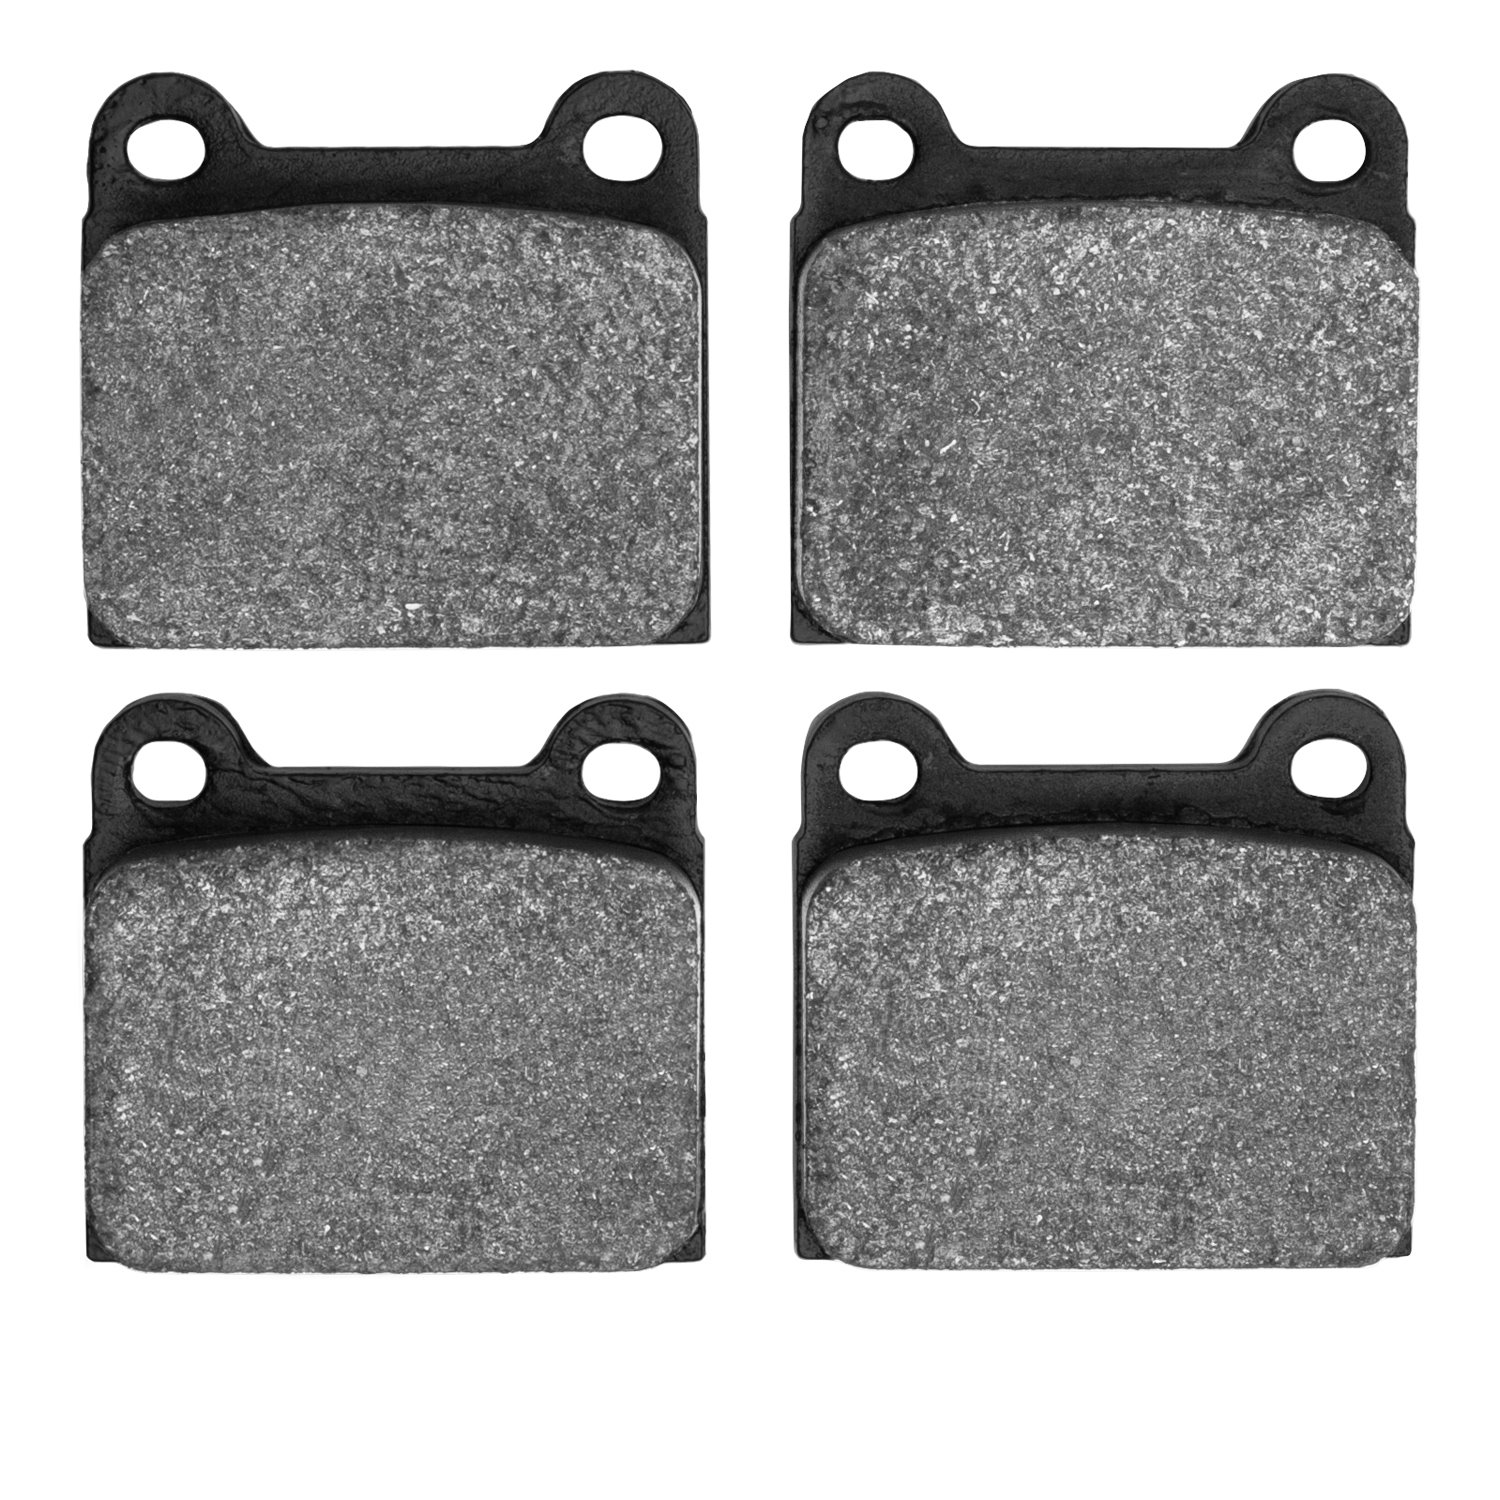 1551-0031-00 5000 Advanced Low-Metallic Brake Pads, 1961-2004 Multiple Makes/Models, Position: Rear,Front